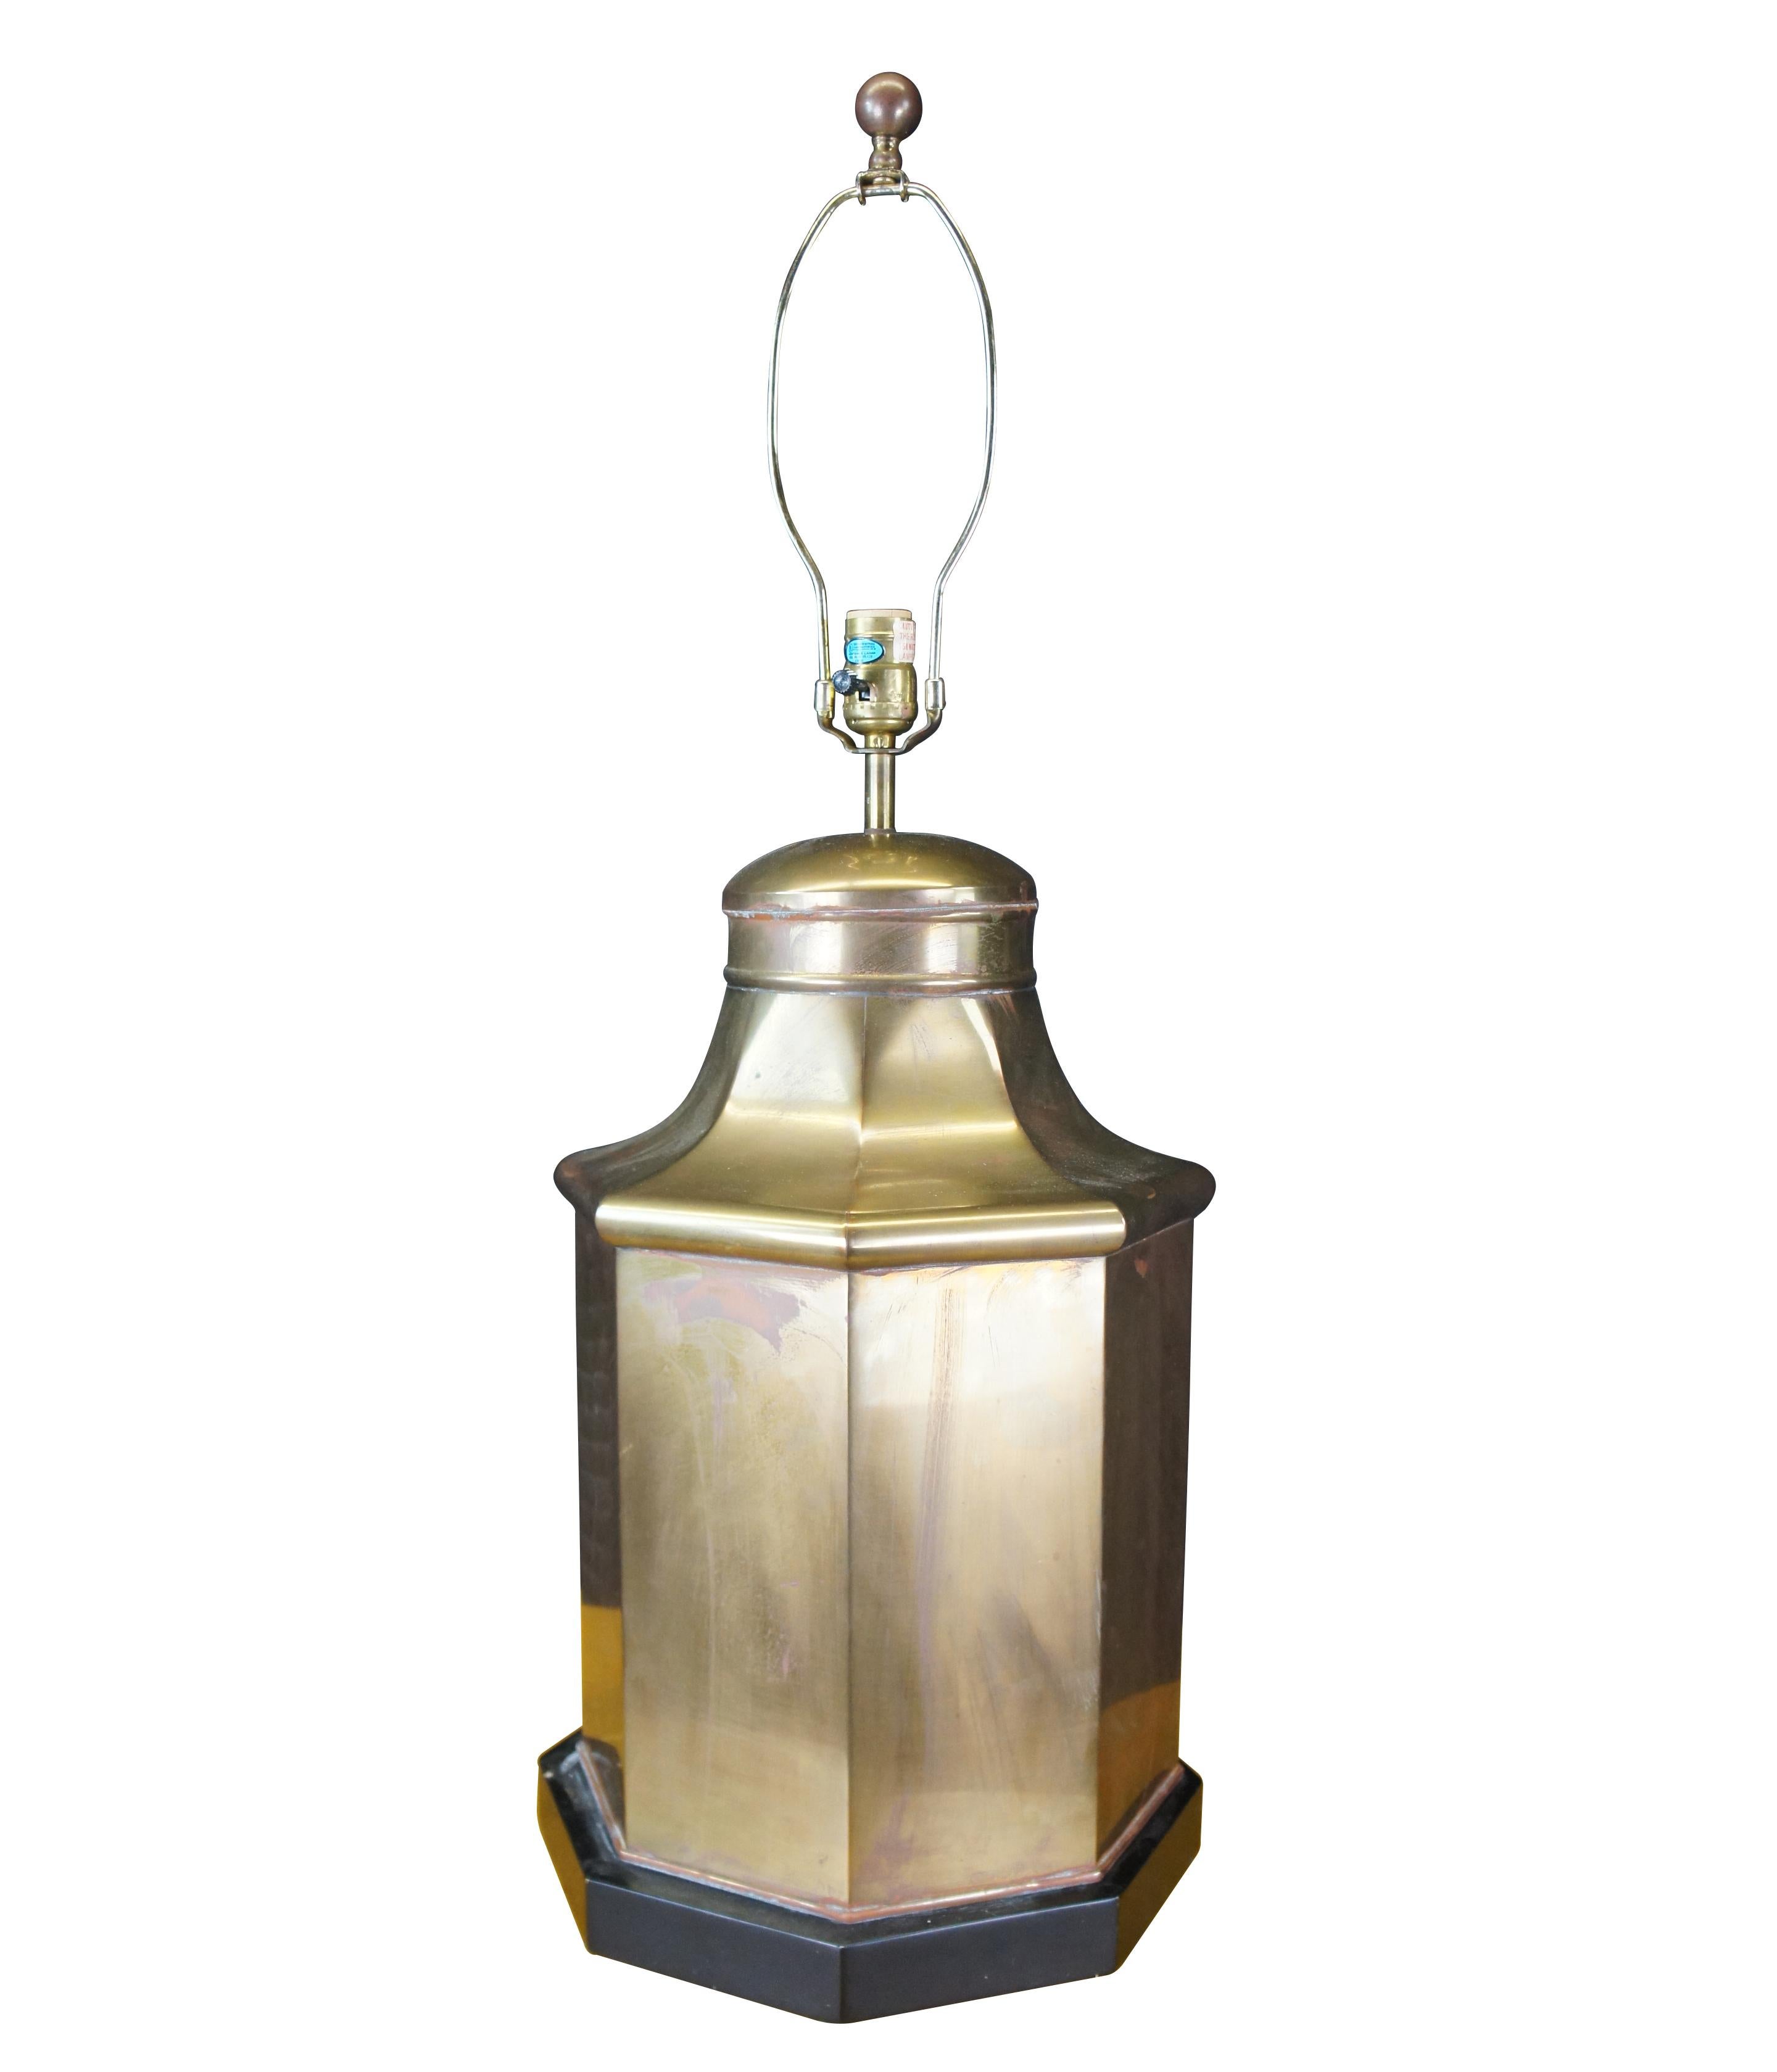 Vintage Chapman chinoiserie octagonal brass tea canister table lamp over wooden base, circa 1972.